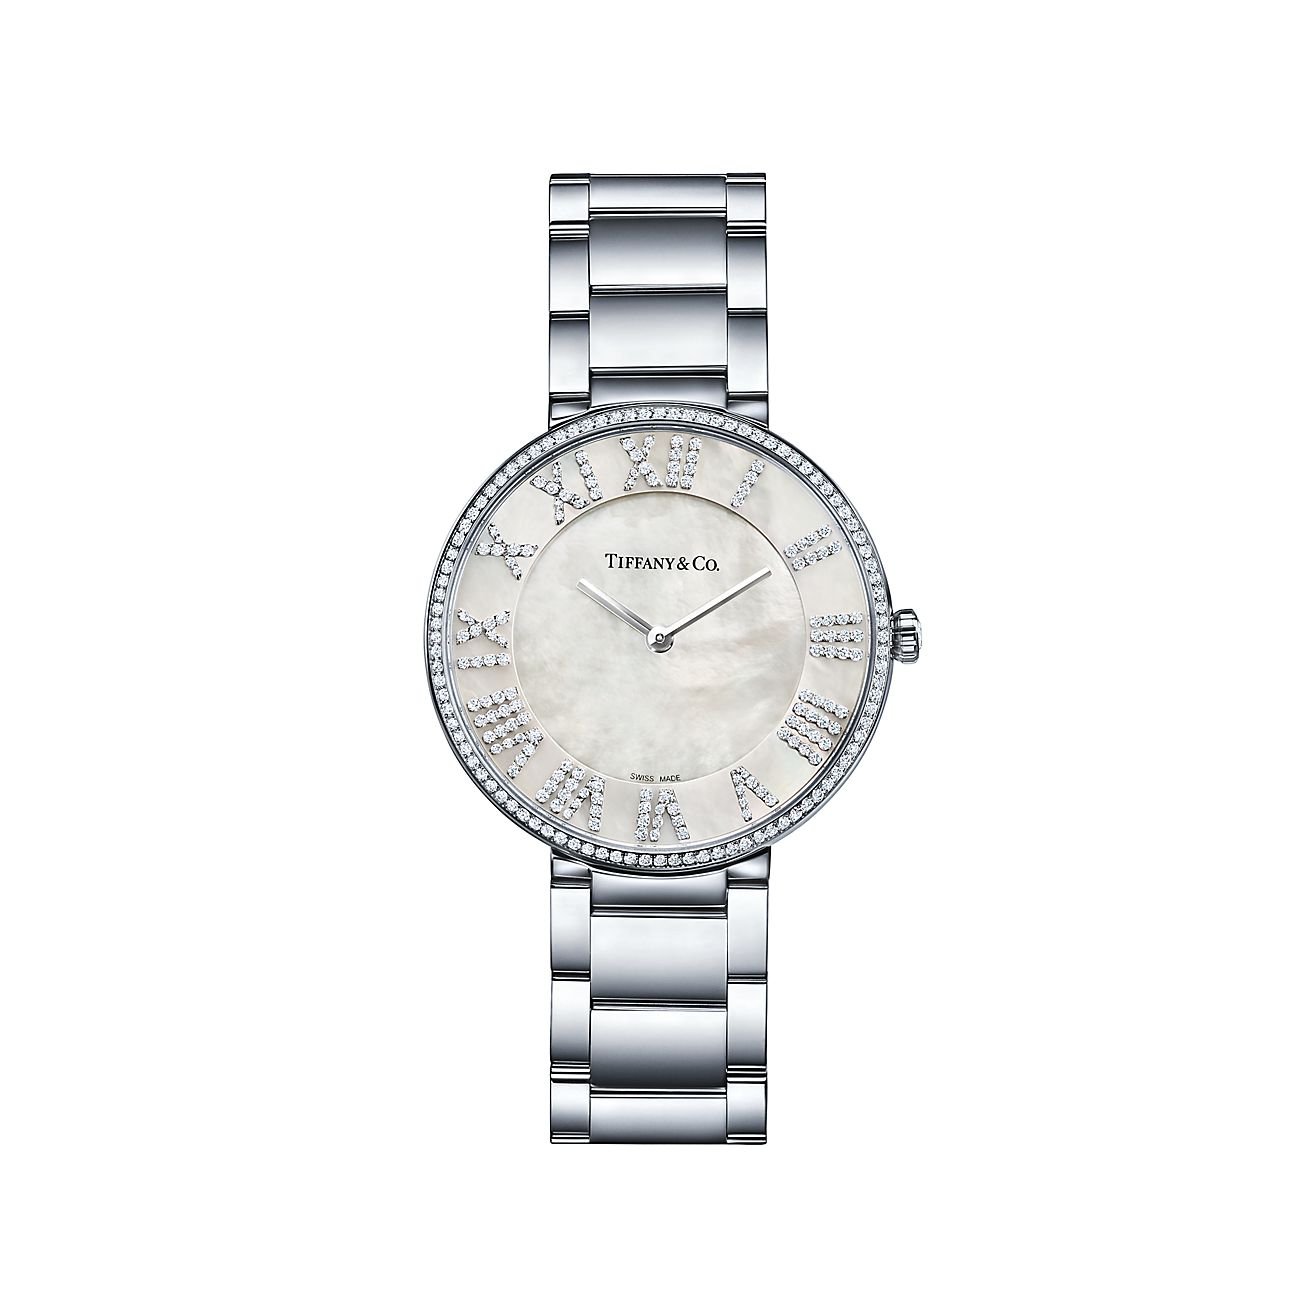 Atlas® 34 mm Watch in Stainless Steel with Diamonds and White  Mother-of-pearl | Tiffany & Co.